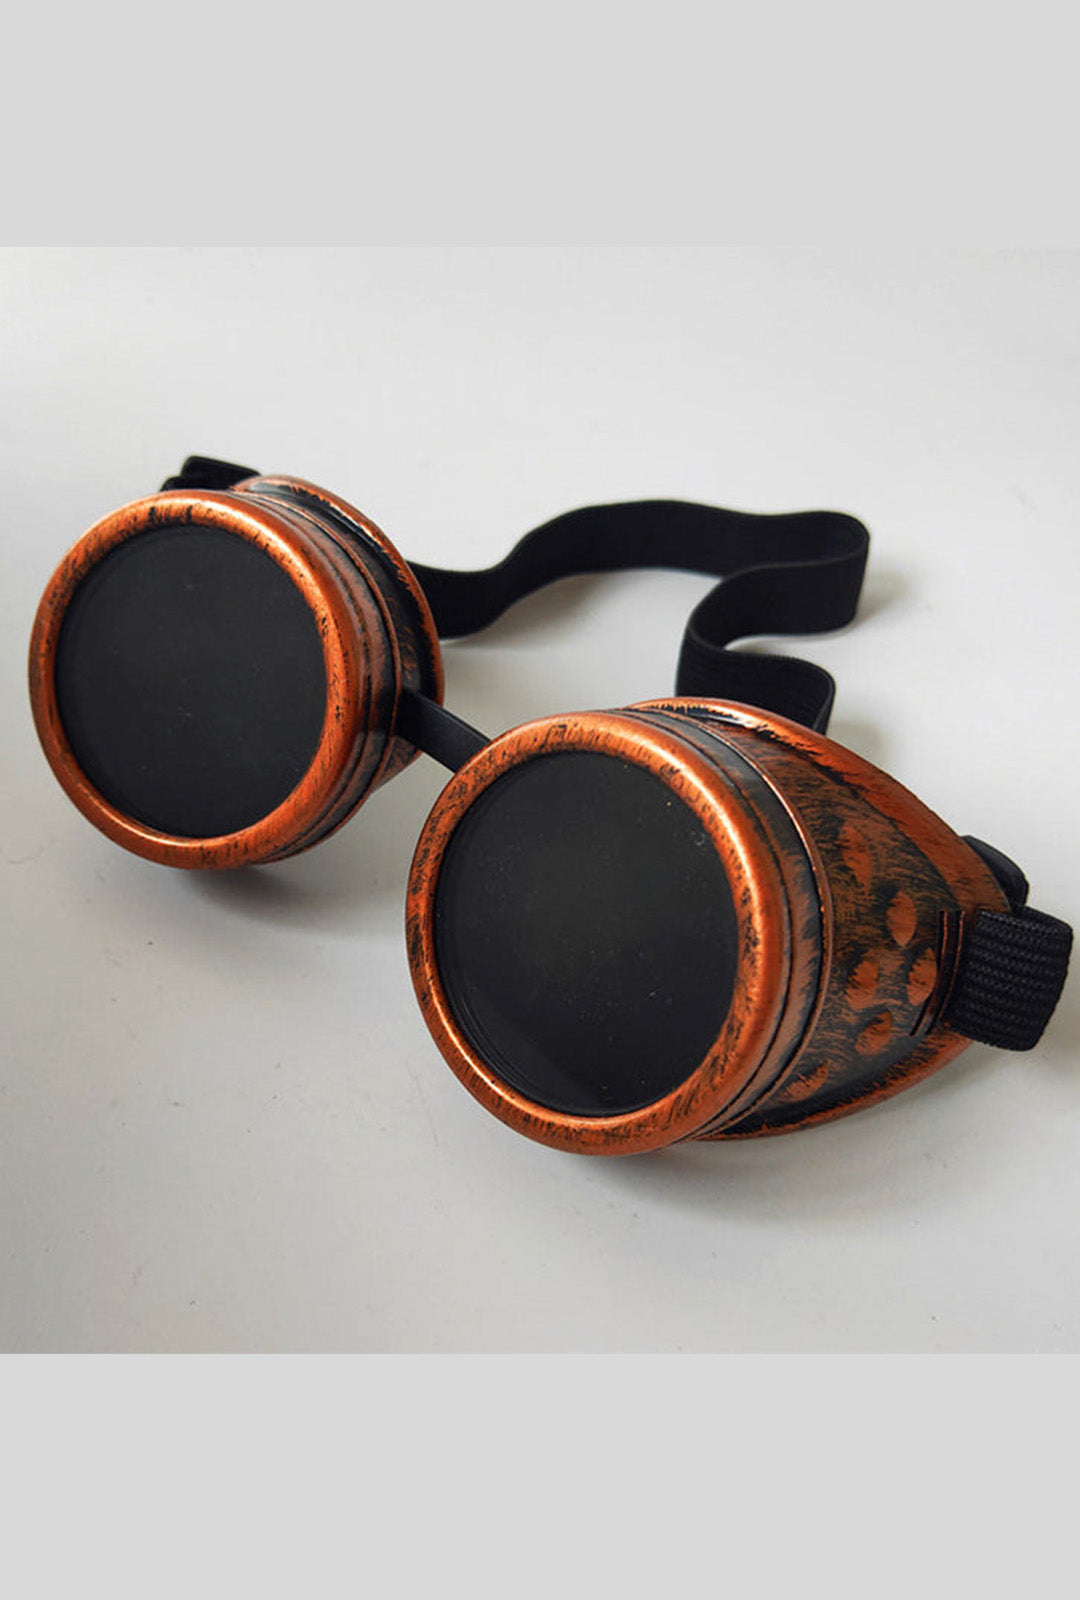 Brushed Copper Steampunk Goggles